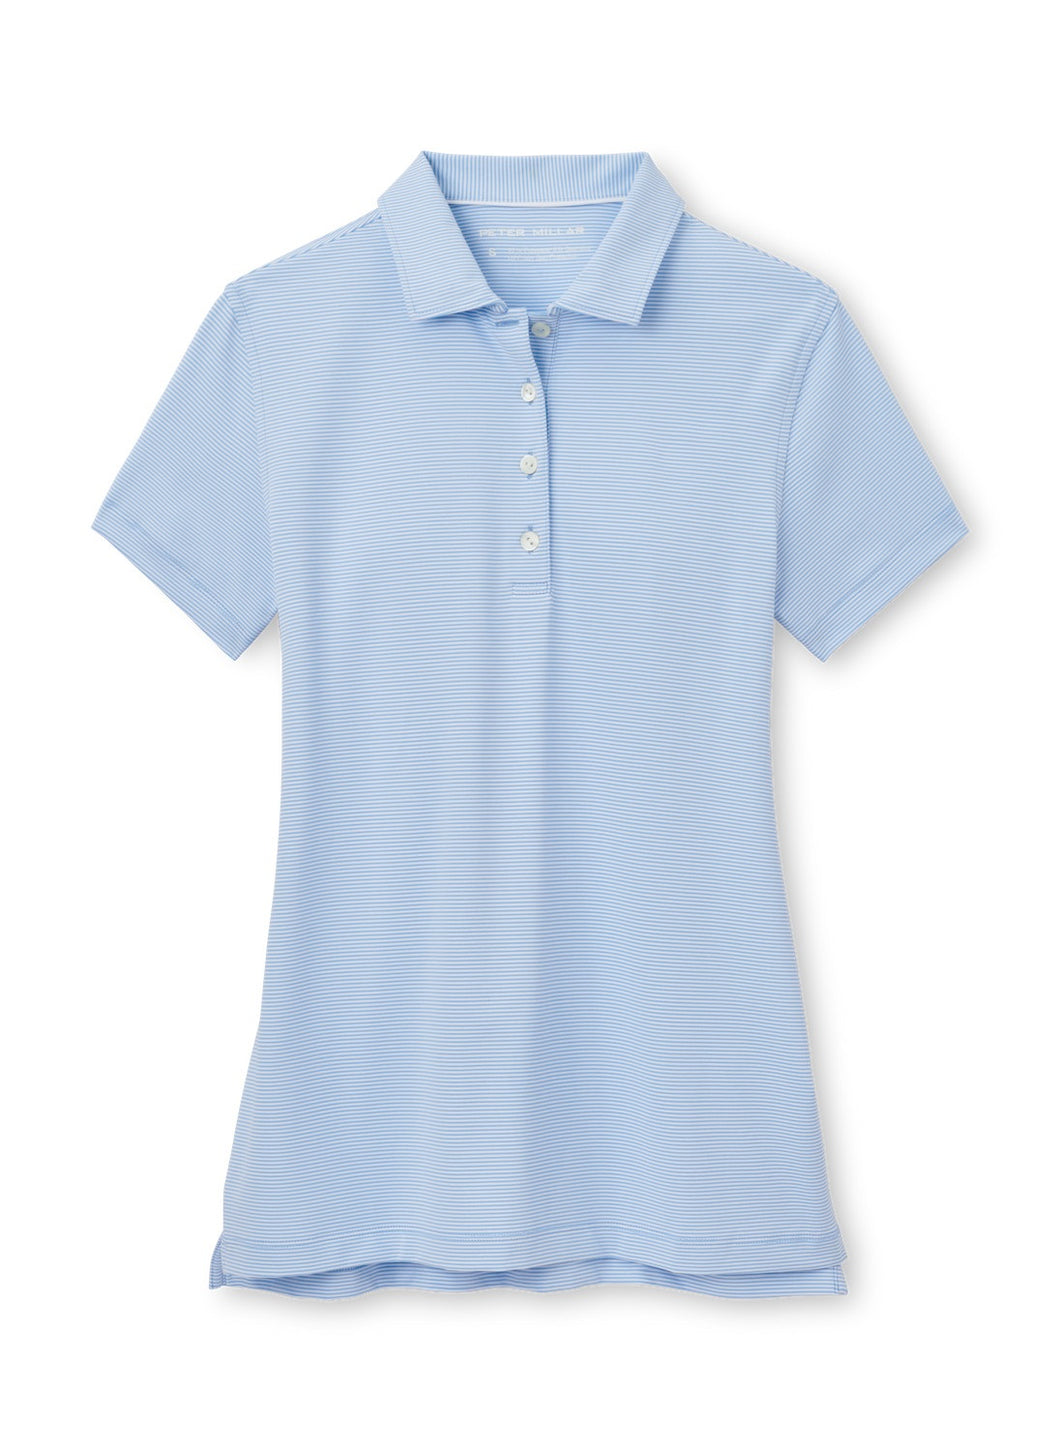 Women's Jubilee Performance Button Polo (2 Colors)